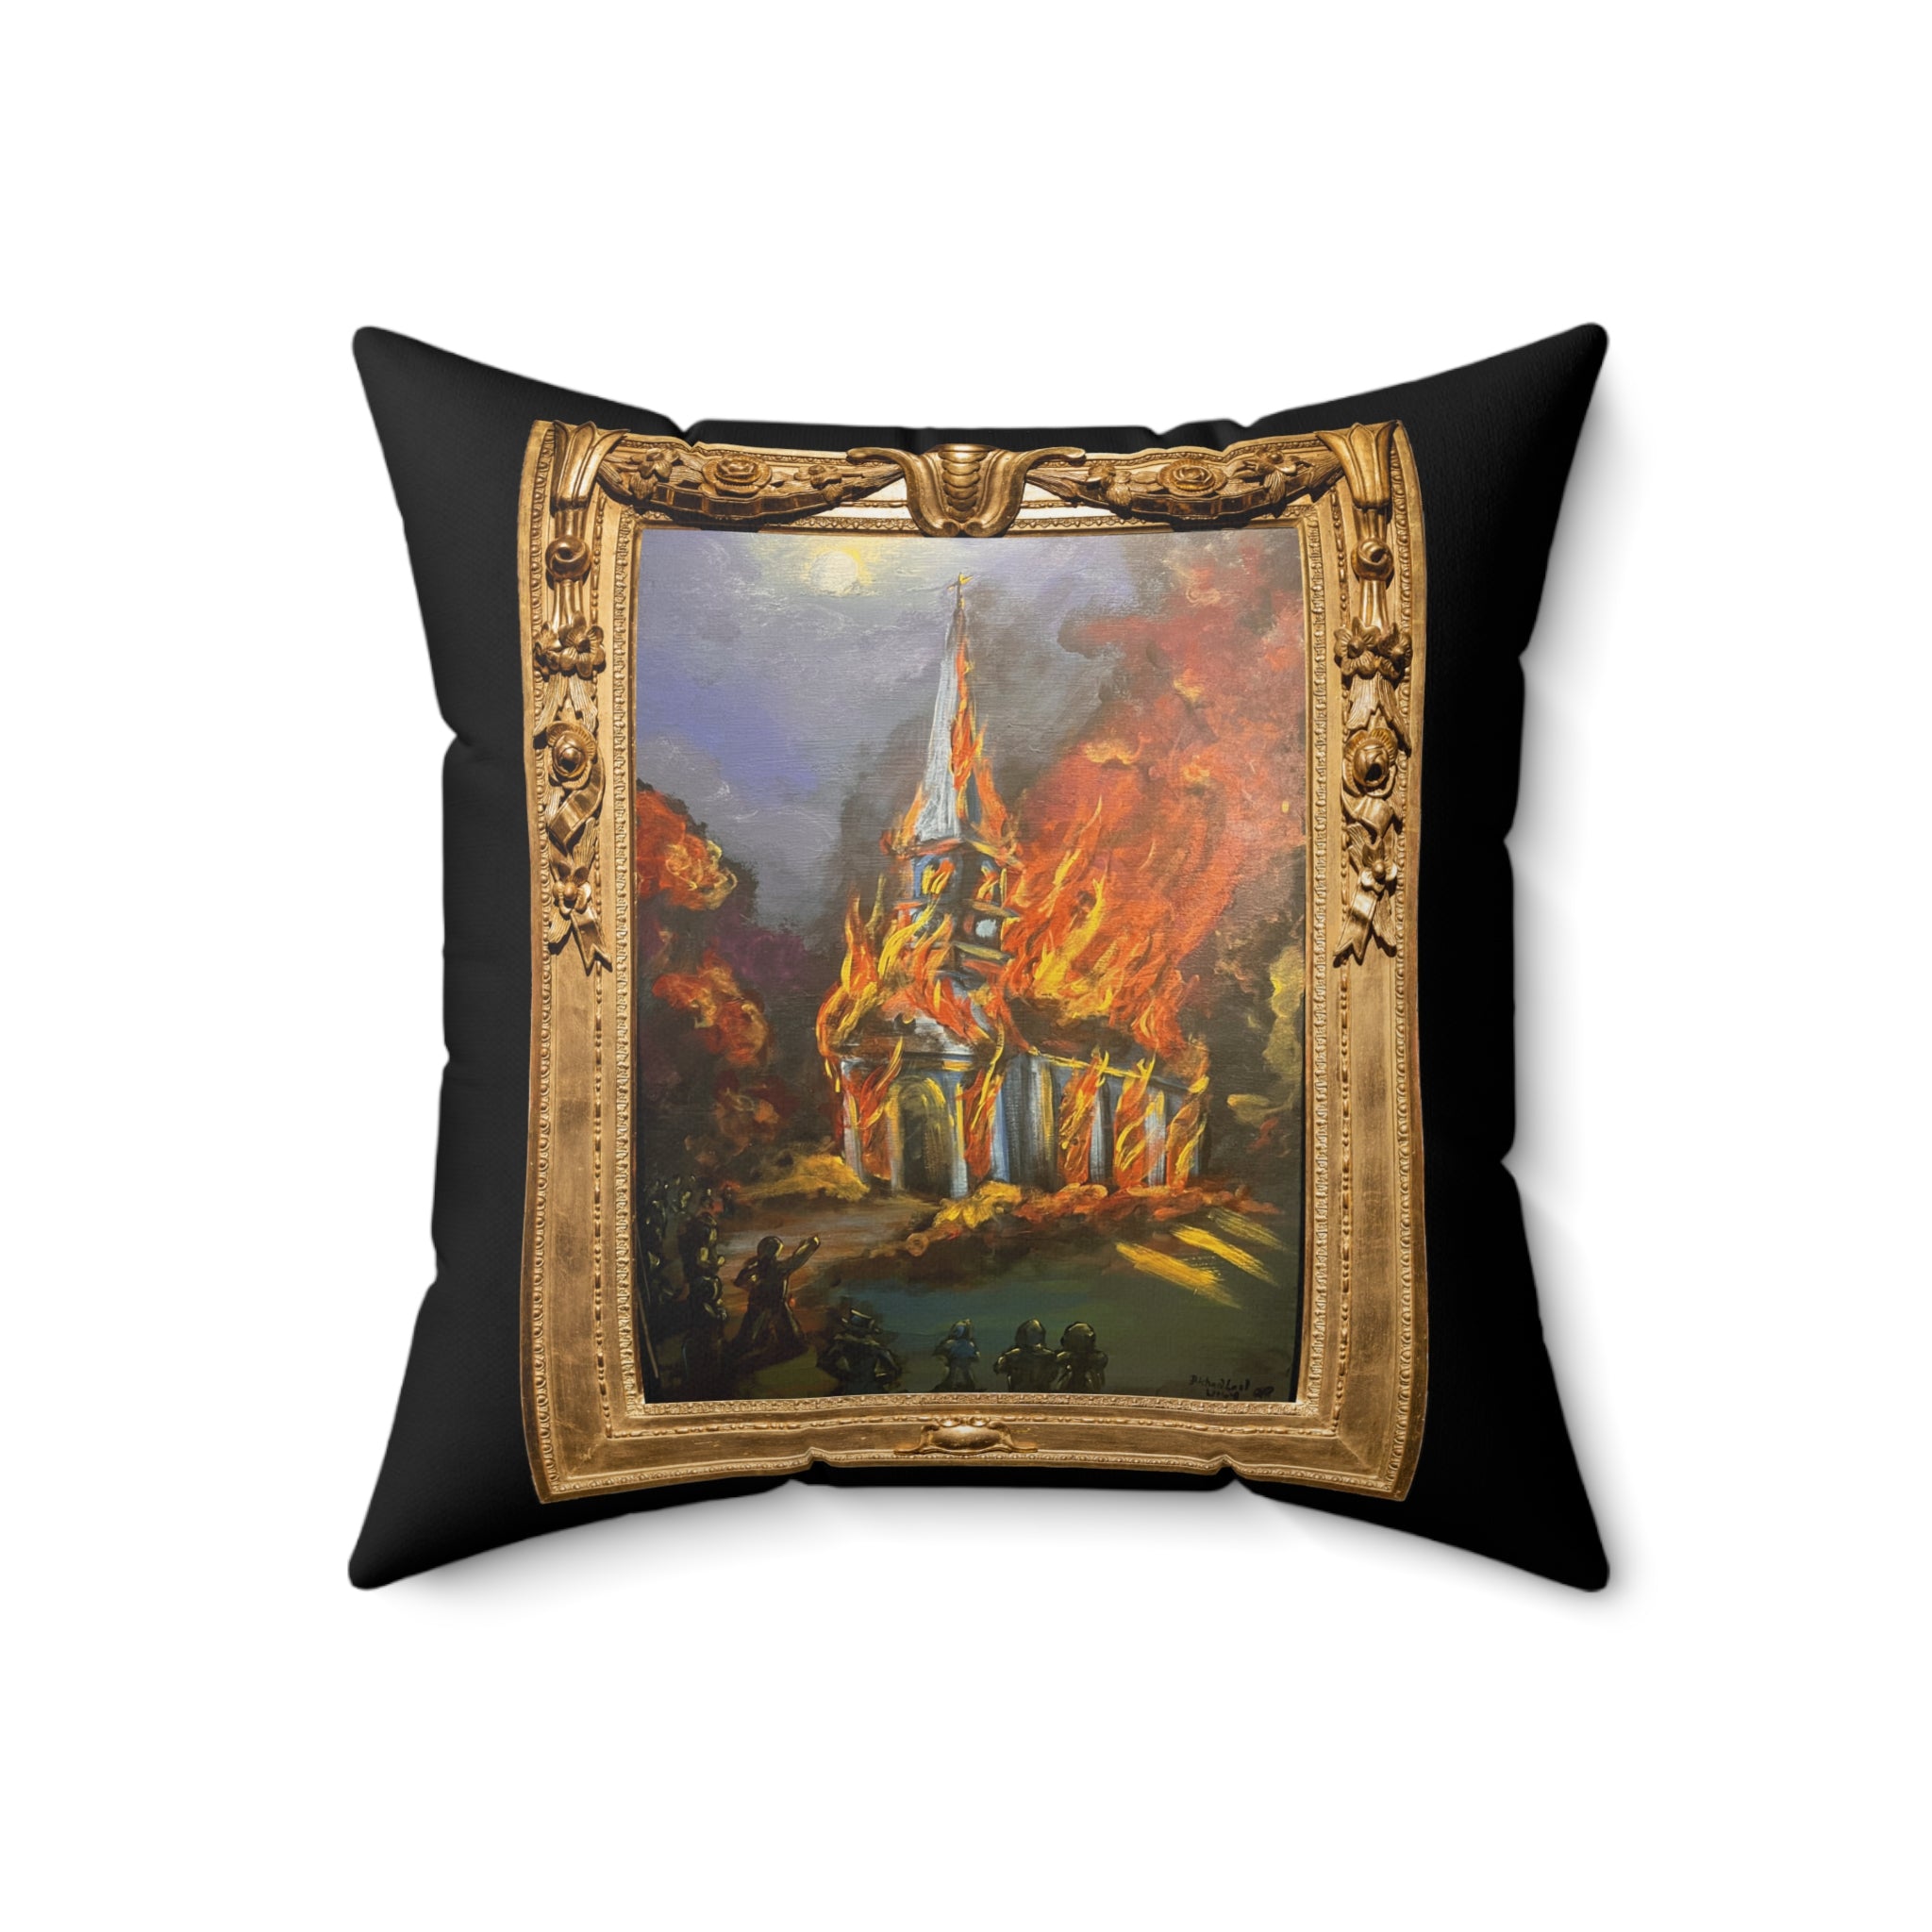 The Richard-Lael Gallery "The White Church, Weymouth" Square Pillow